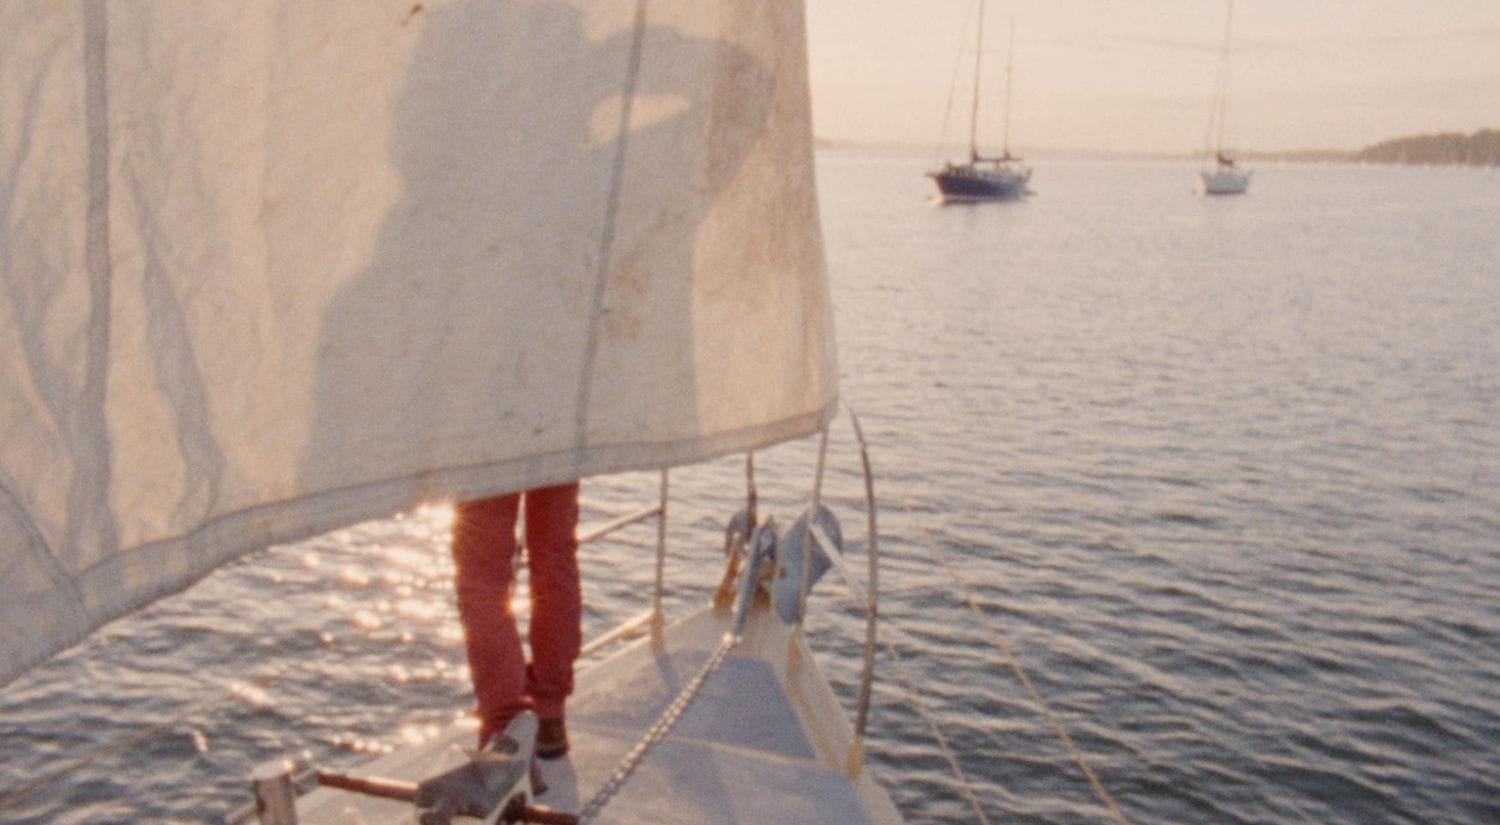 A person is seen in shadow behind a sail, standing on the deck of a boat, at sunset